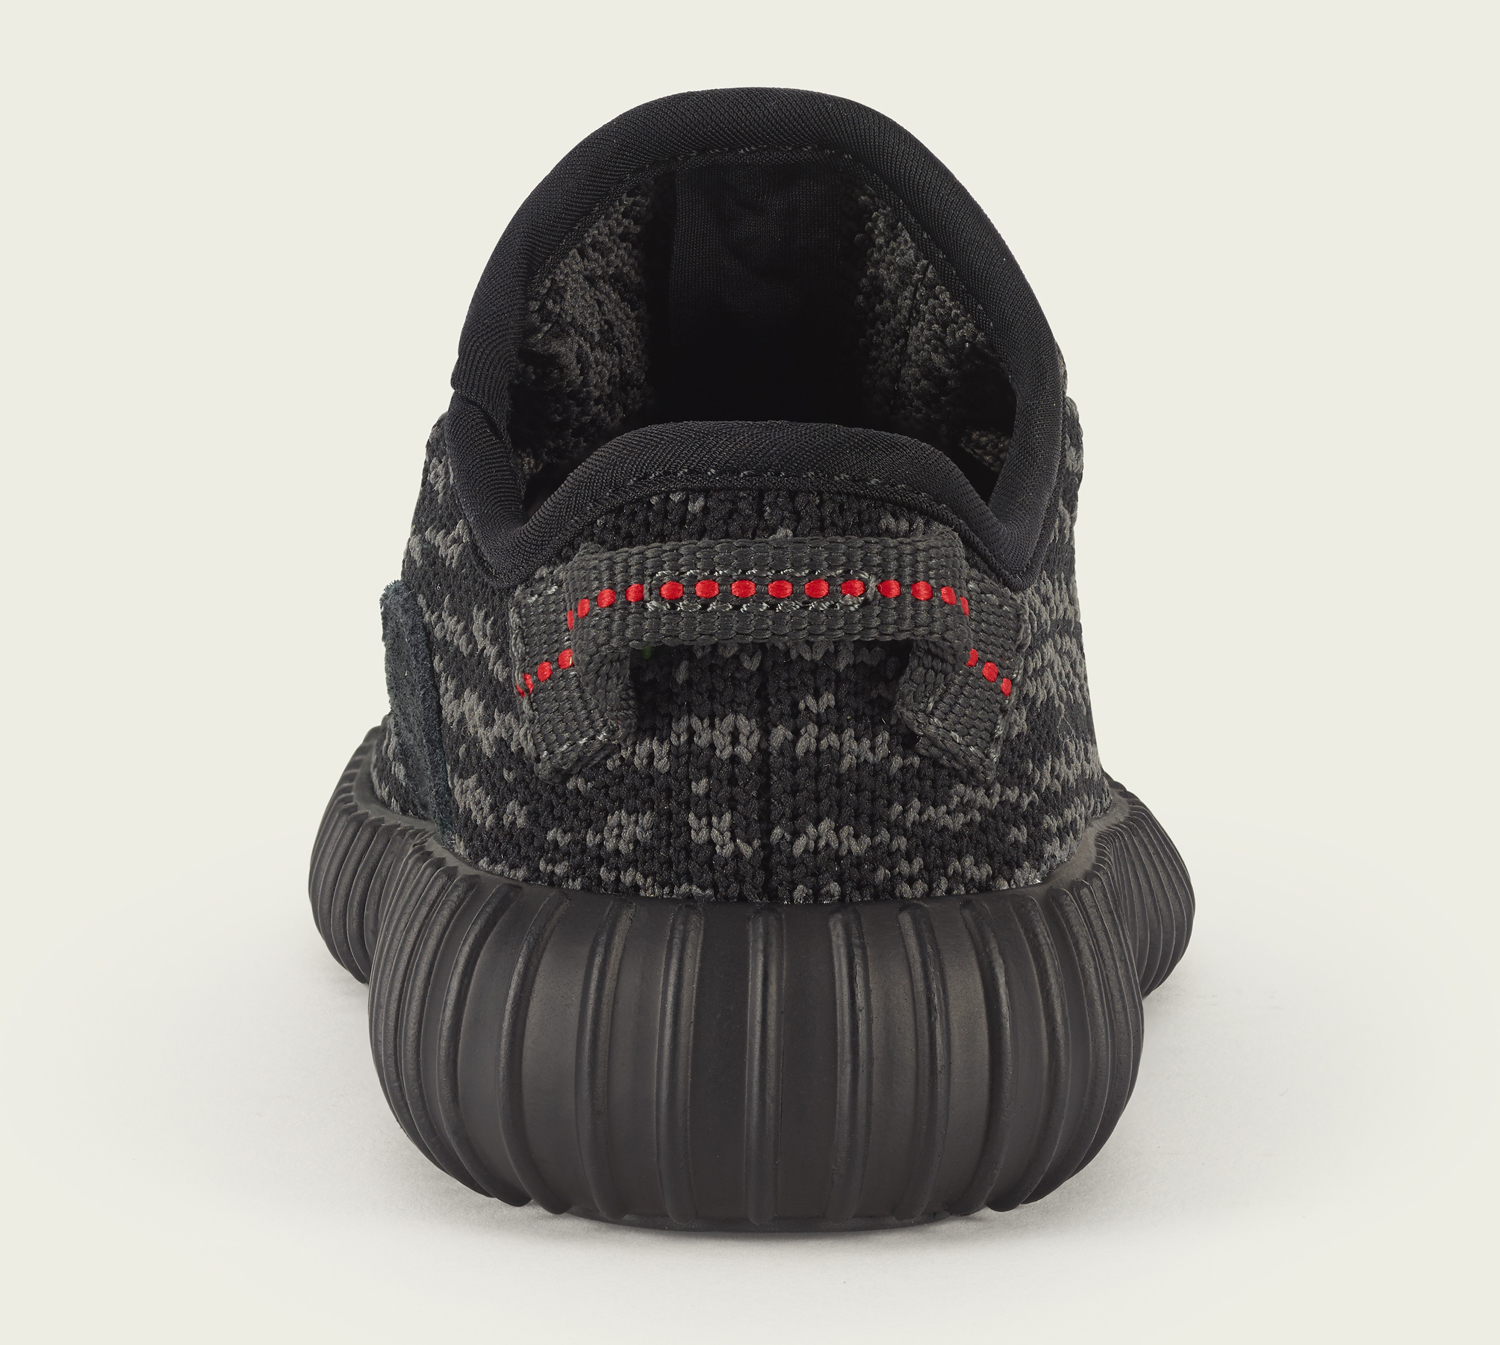 infant-yeezy-boost-pirate-black-03_alh4gg